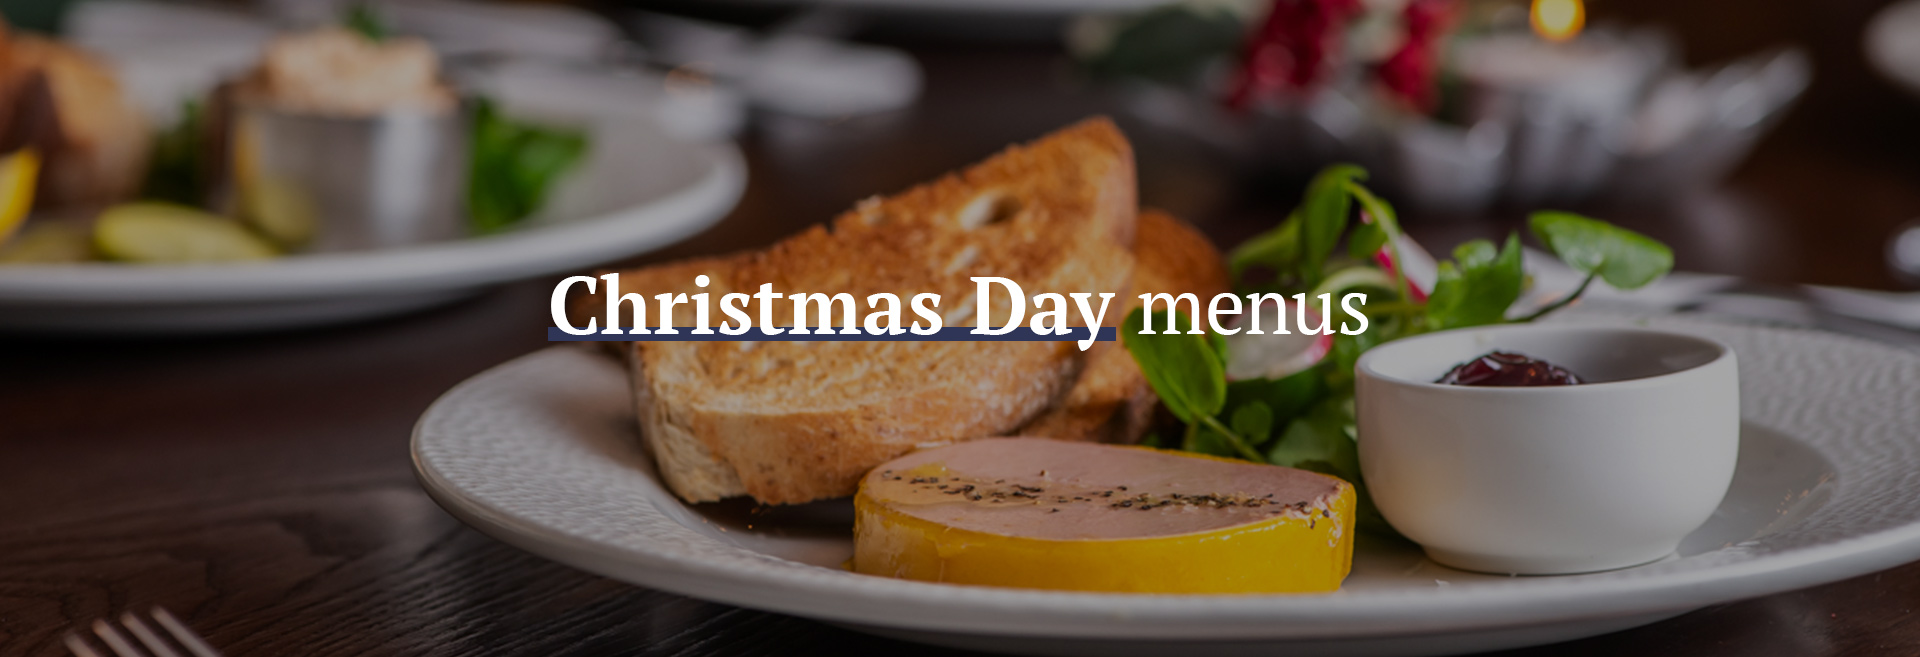 Christmas Day Menu at The Garden Gate